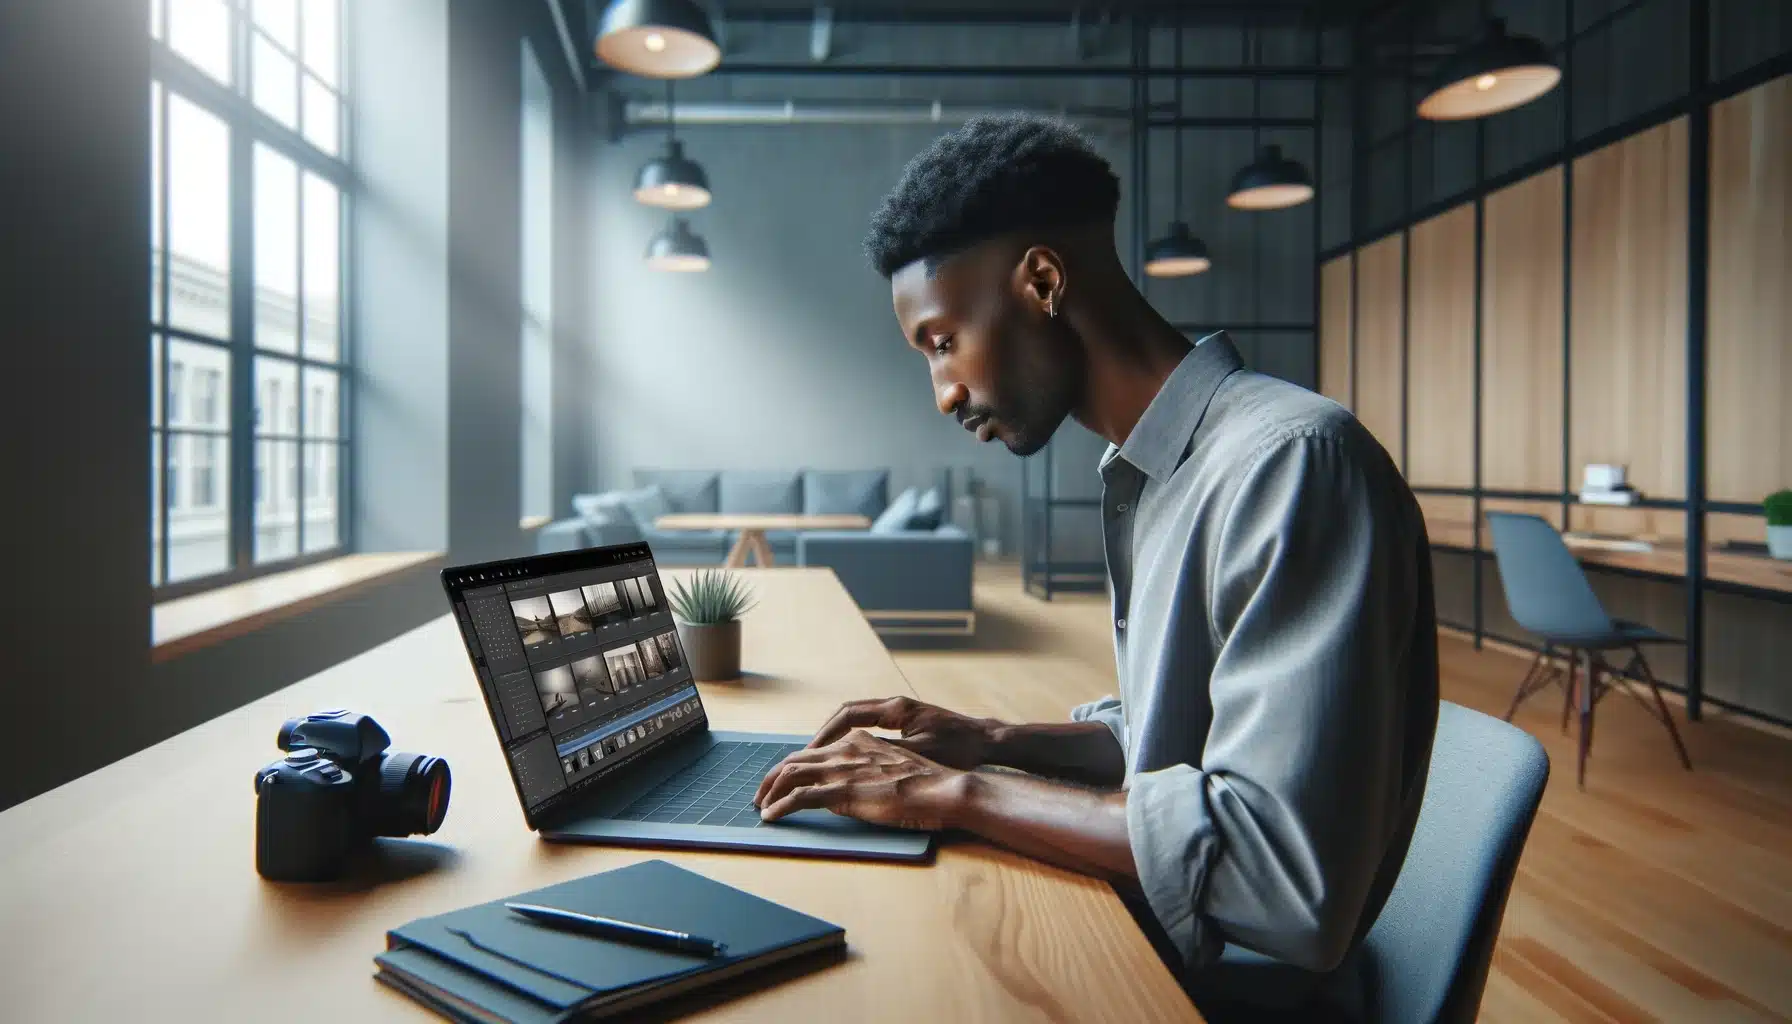 An African American male in his early thirties following tips for lightroom editing on his laptop in a modern office.